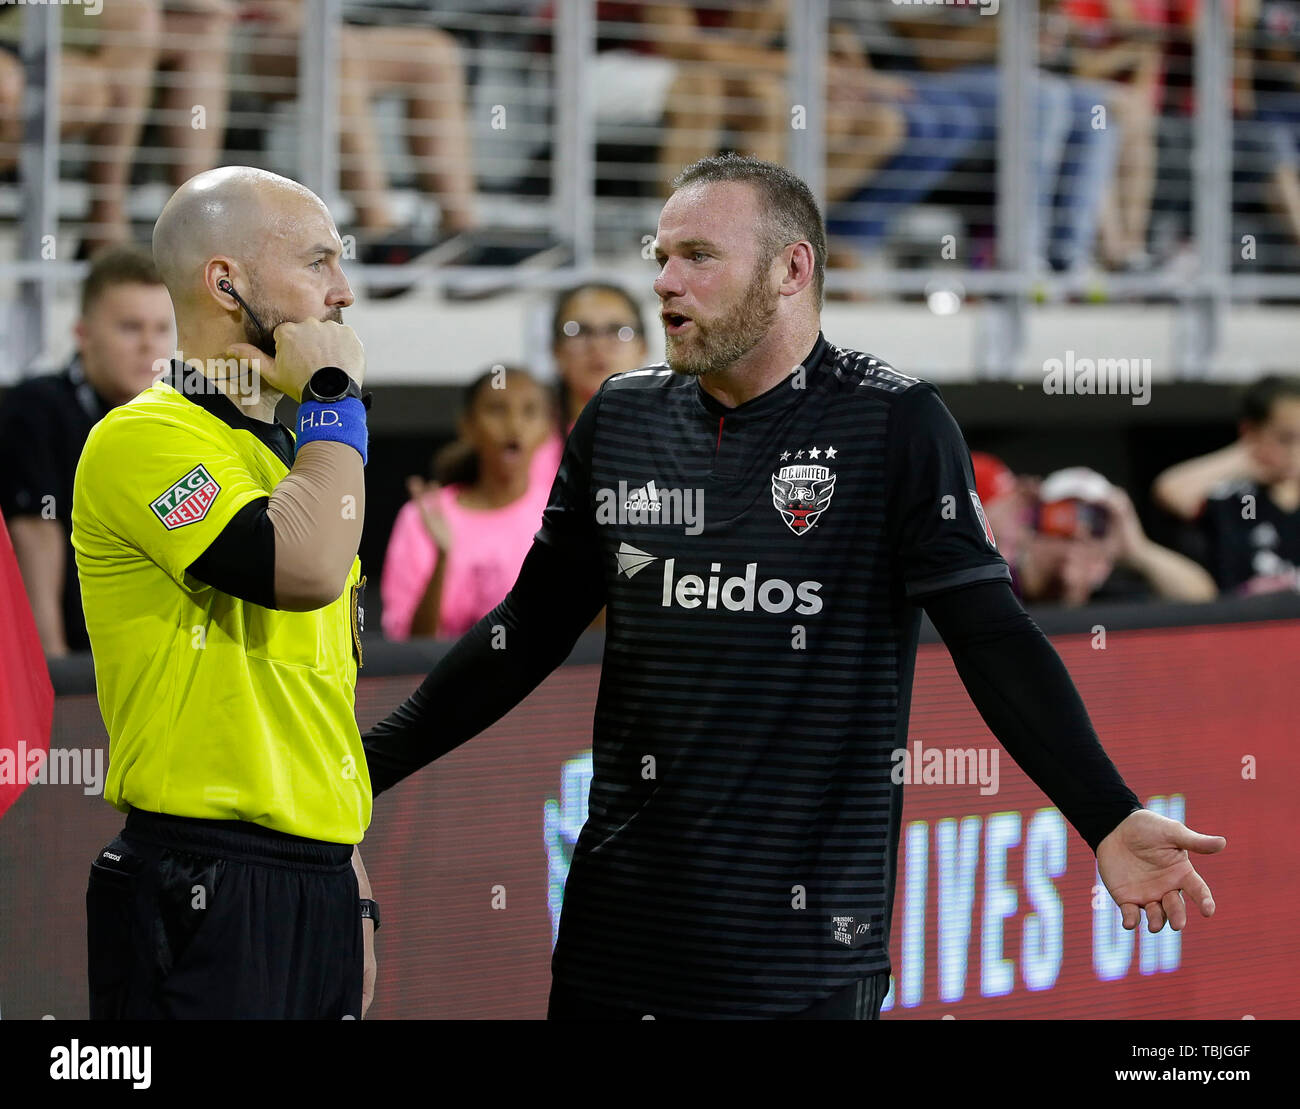 Washington DC, USA. 1st June, 2019. D.C. United Forward (9) Wayne Rooney speaks with a lineman during an MLS soccer match between the D.C. United and the San Jose Earthquakes at Audi Field in Washington DC. Justin Cooper/CSM/Alamy Live News Stock Photo